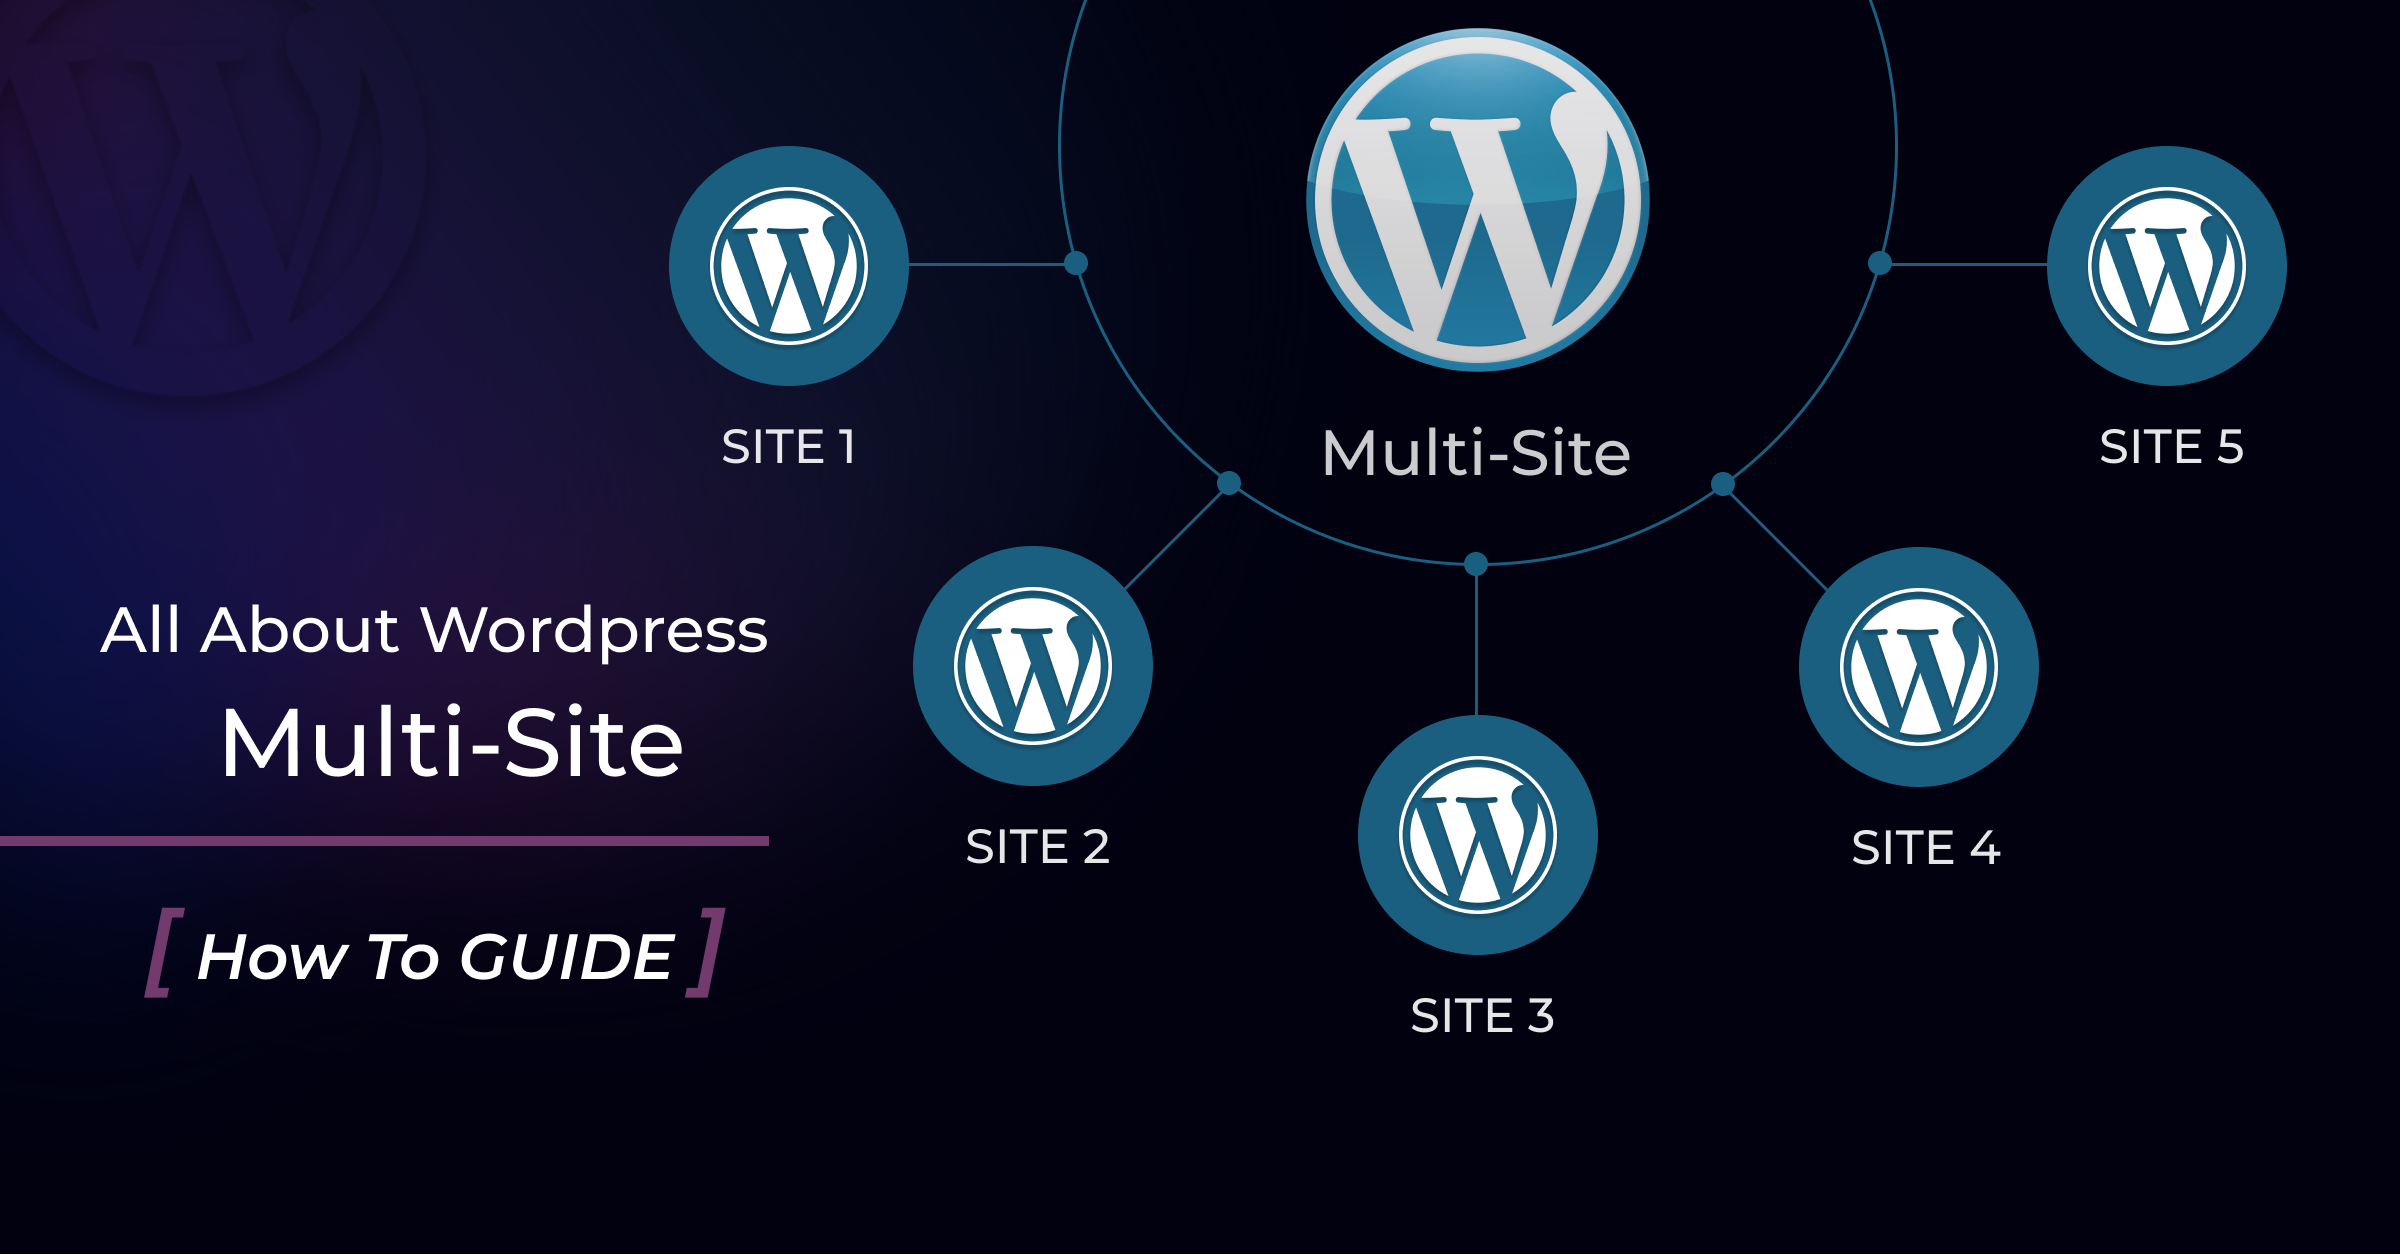 How to Deploy WordPress Multisite Network on Cloud using ServerAvatar